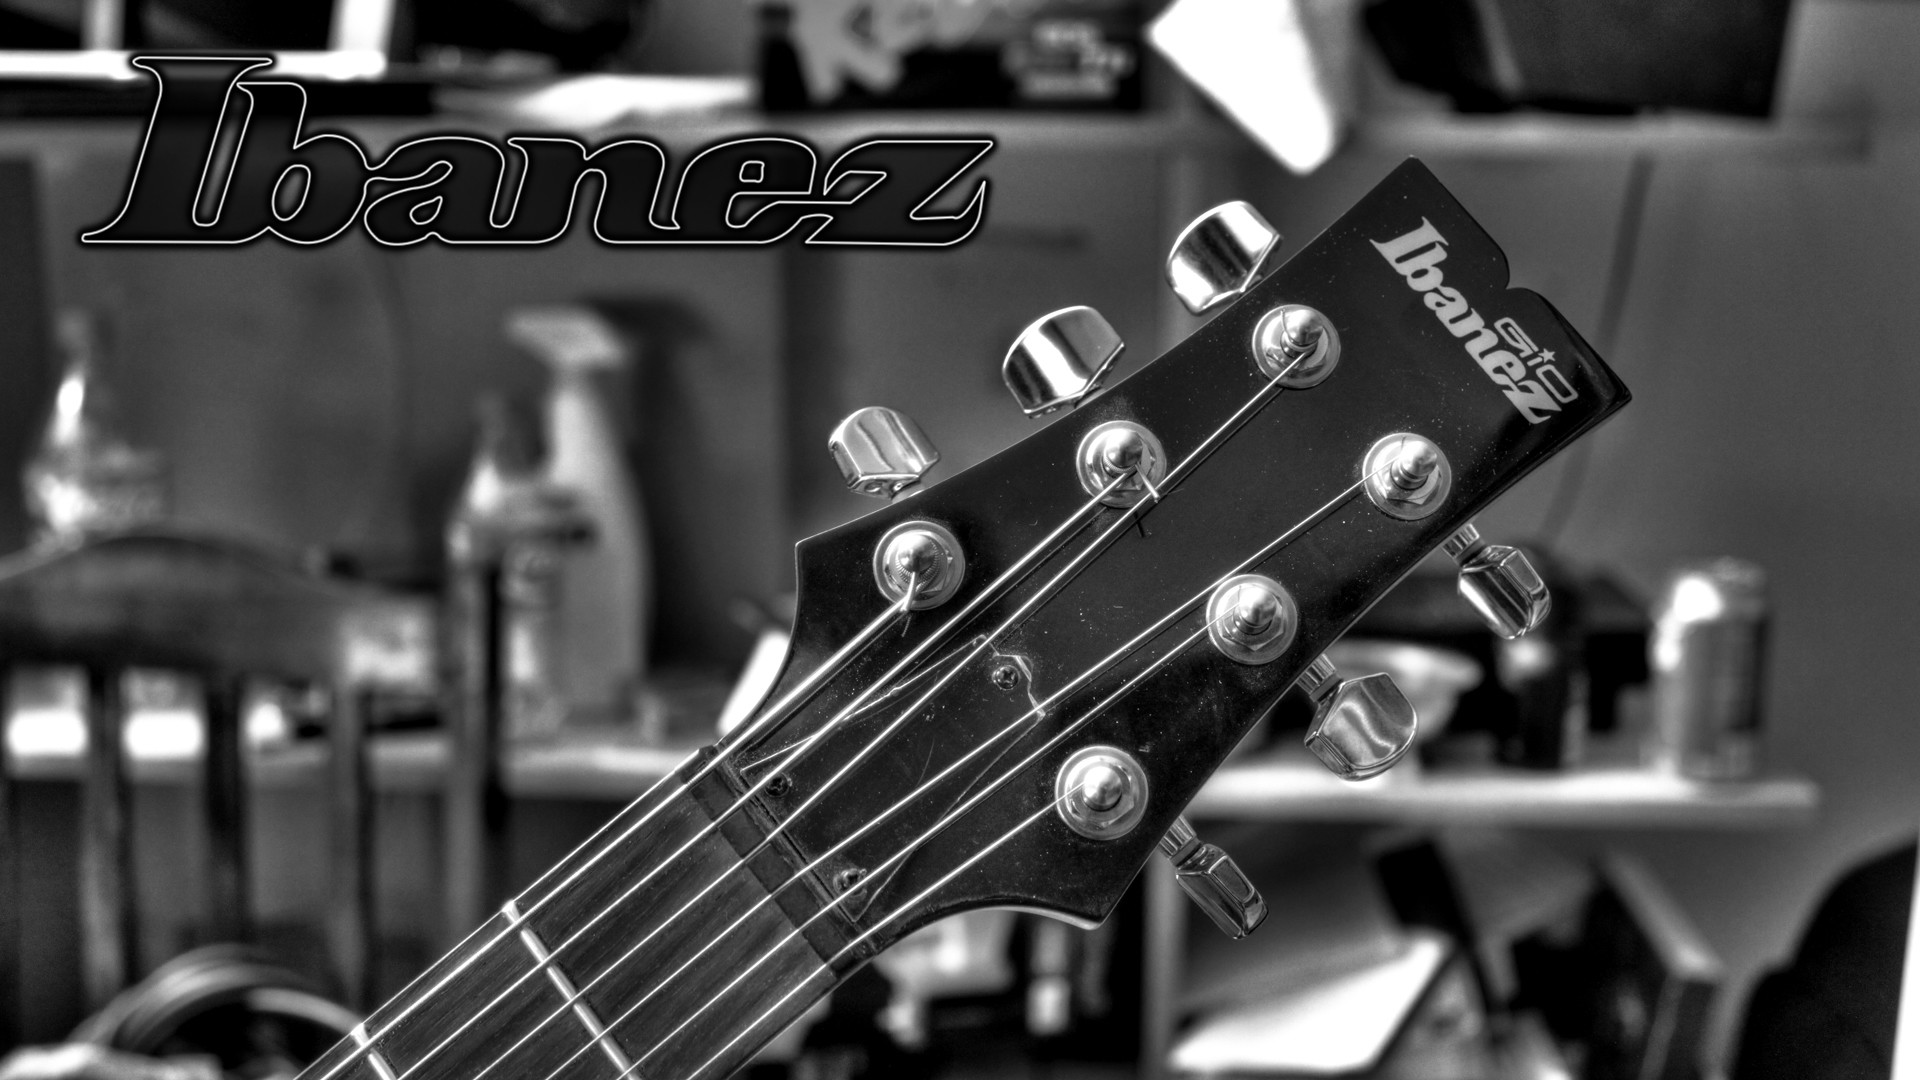 1920x1080 Black And White Ibanez Guitar Picture 4756